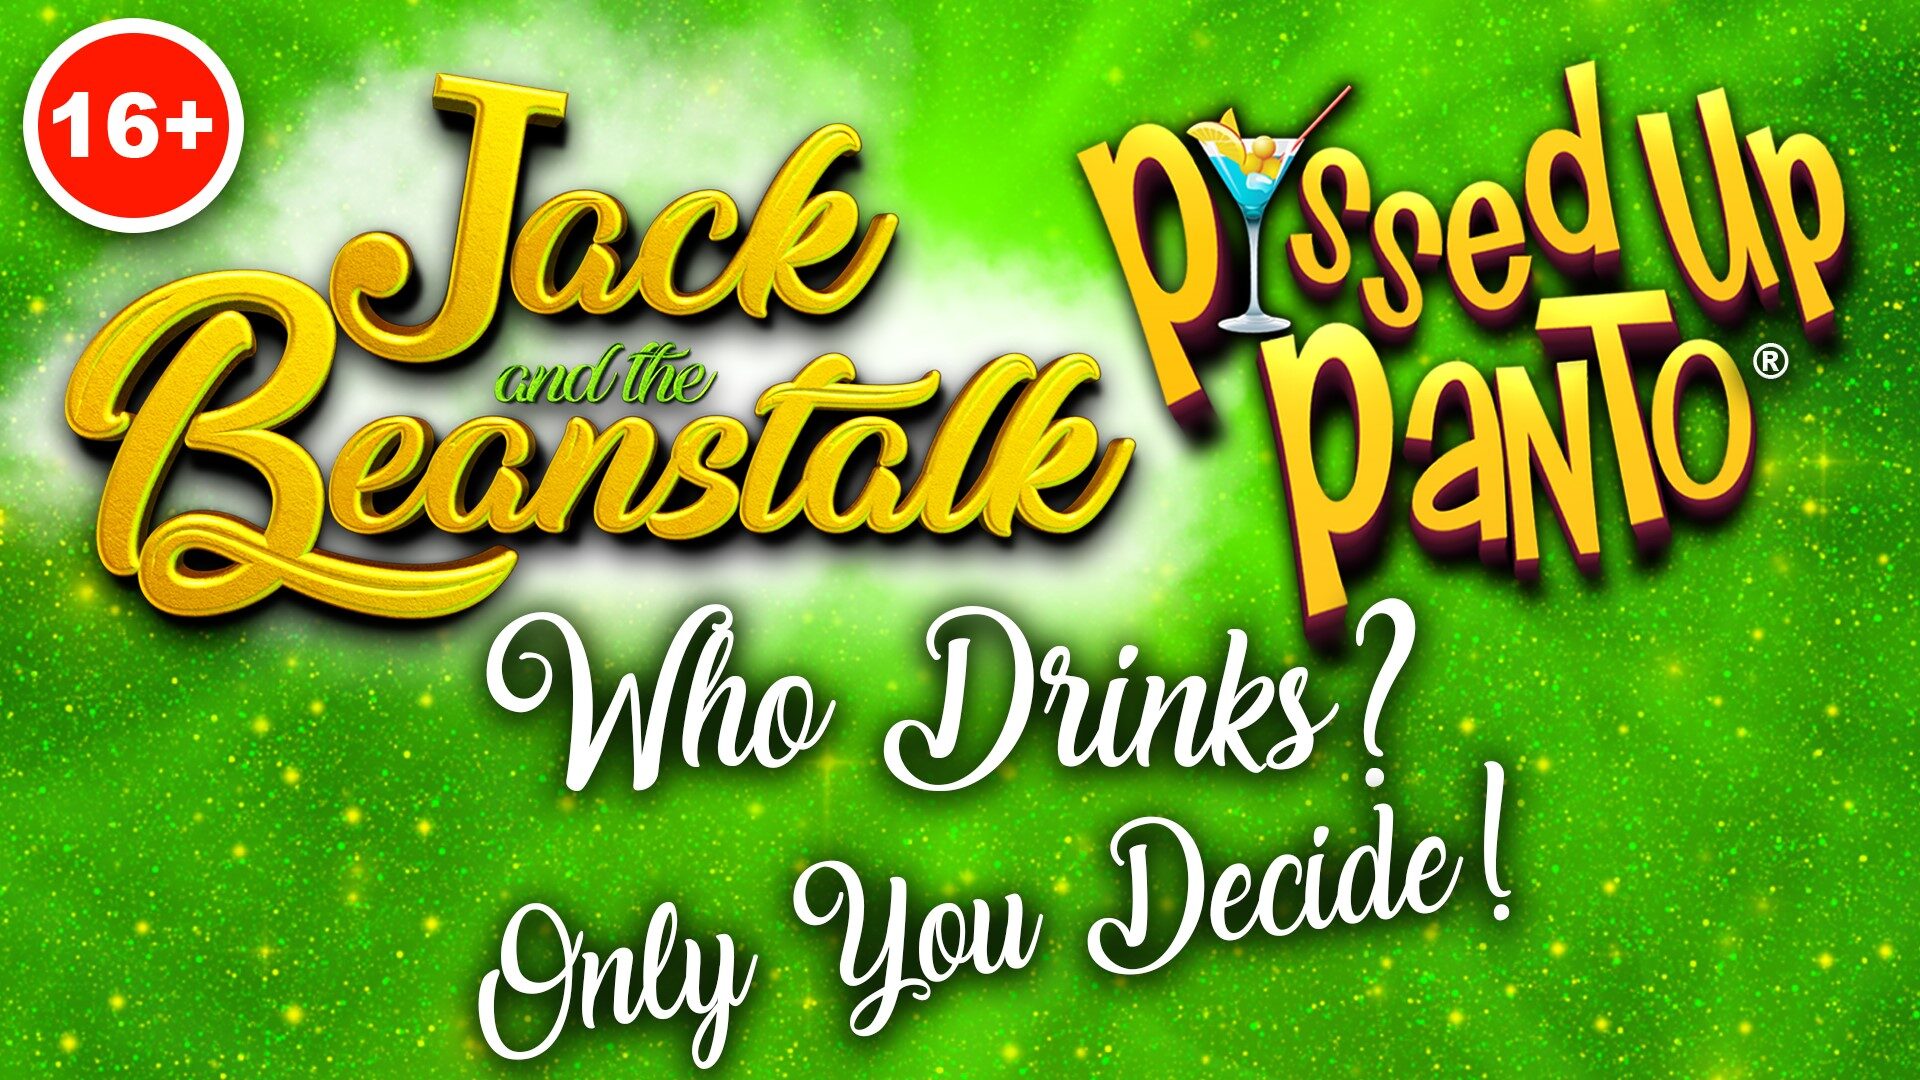 Jack and the Beanstalk: P*ssed Up Panto